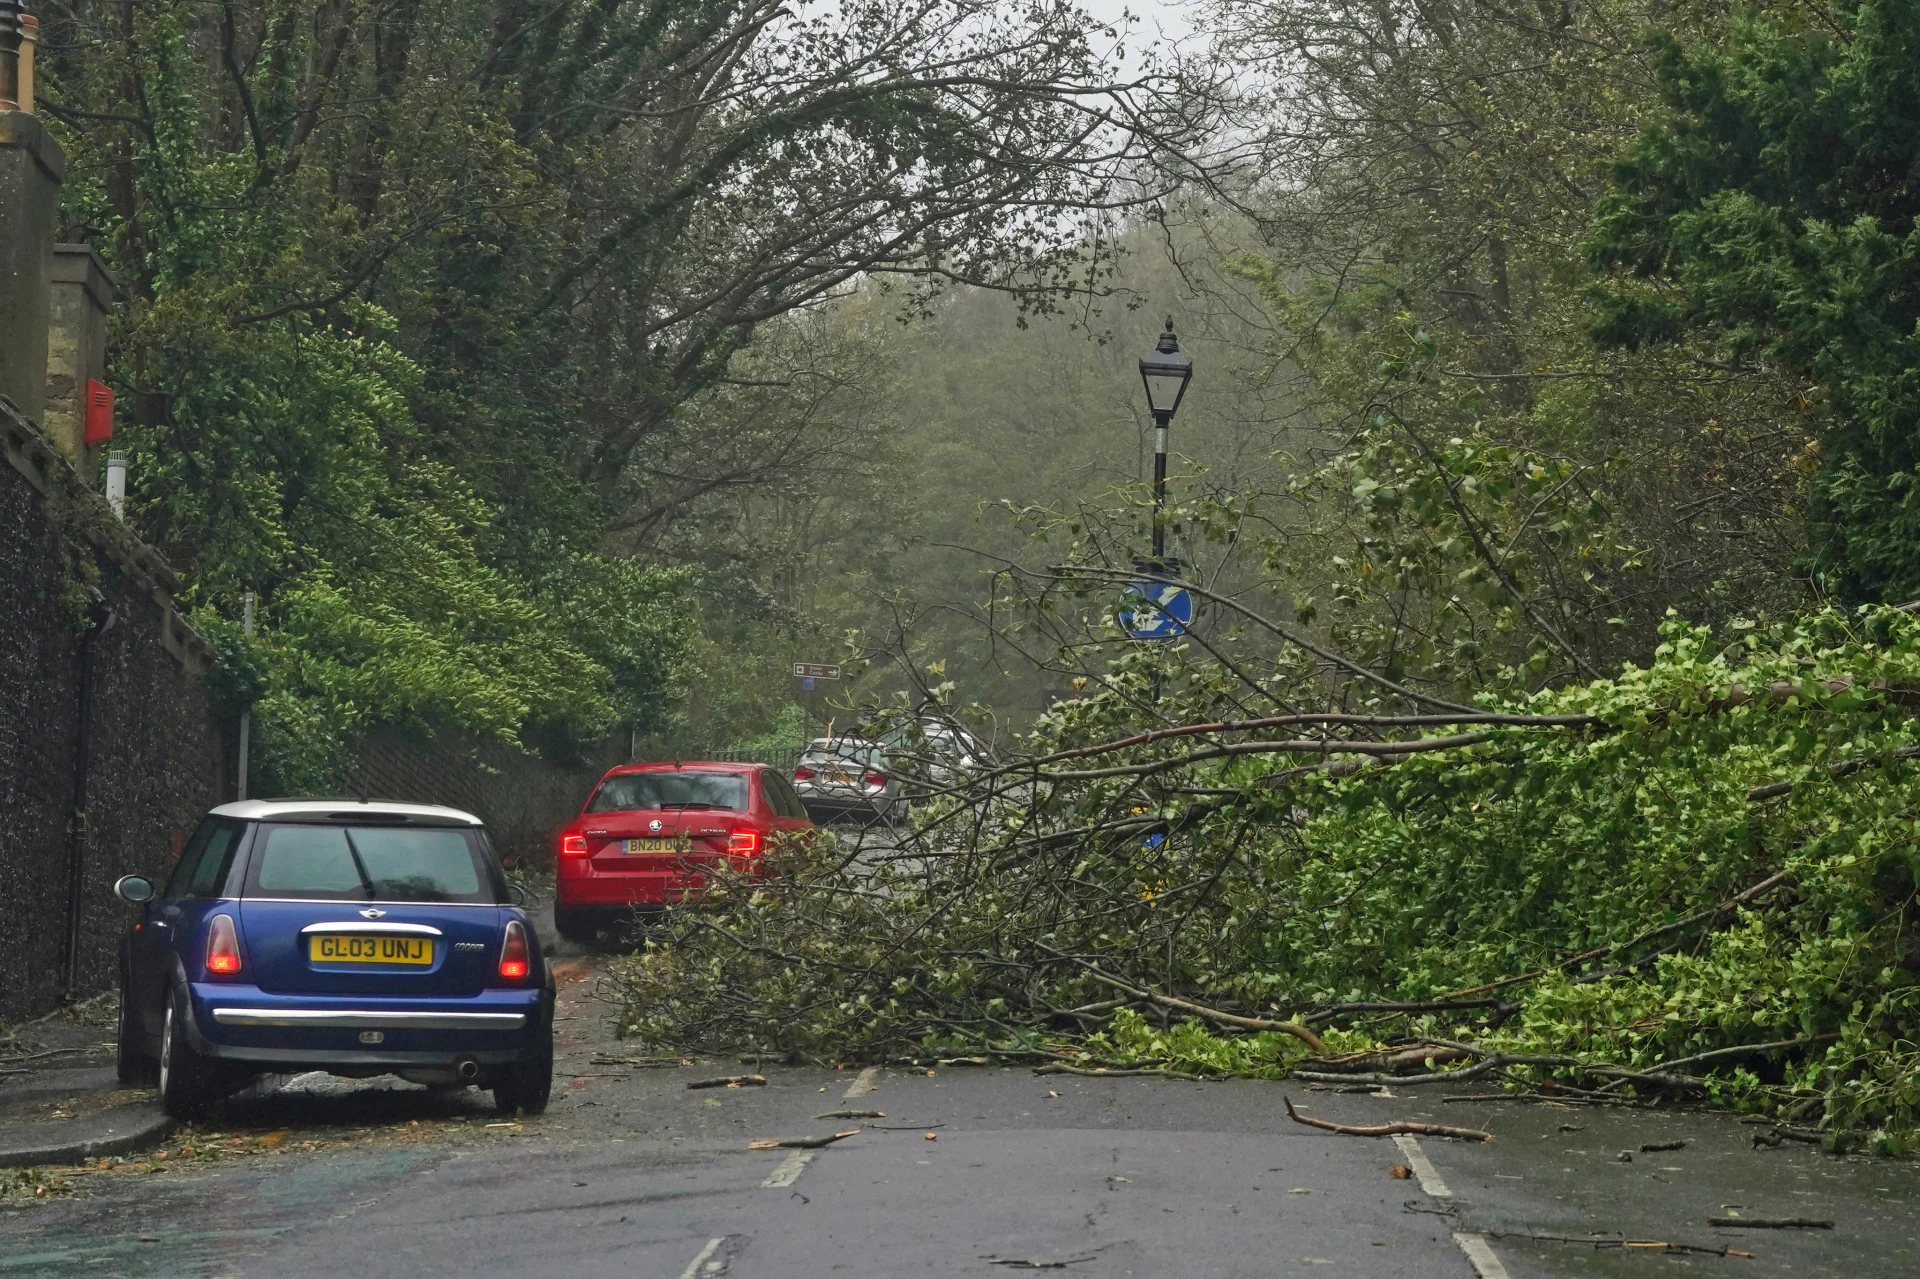 Reutesr/Source: Gareth Fuller/PA Wire/dpa via Reuters Connect: Cars passing a fallen tree in Dover, as Storm Ciaran brings high winds and heavy rain along the south coast of England.